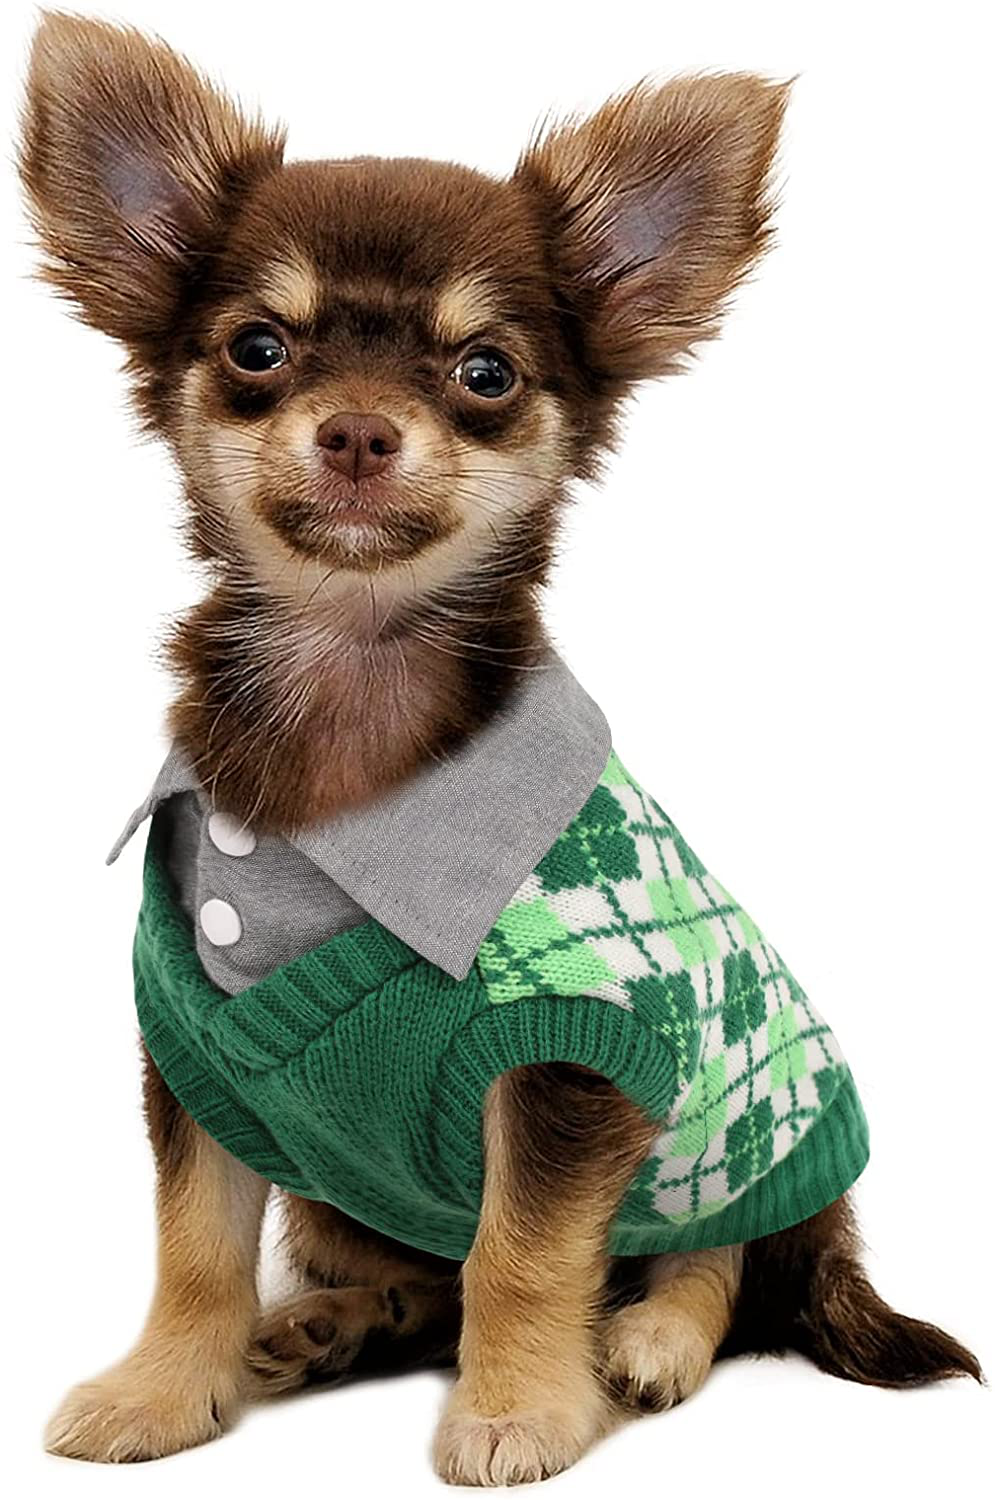 LETSQK Dog Sweater Dog Knitted Pet Clothes Classic Dog Winter Outfit with Plaid Argyle Patterns Warm Dog Sweatshirt with Polo Collar for Small Medium Puppies Dogs Cats